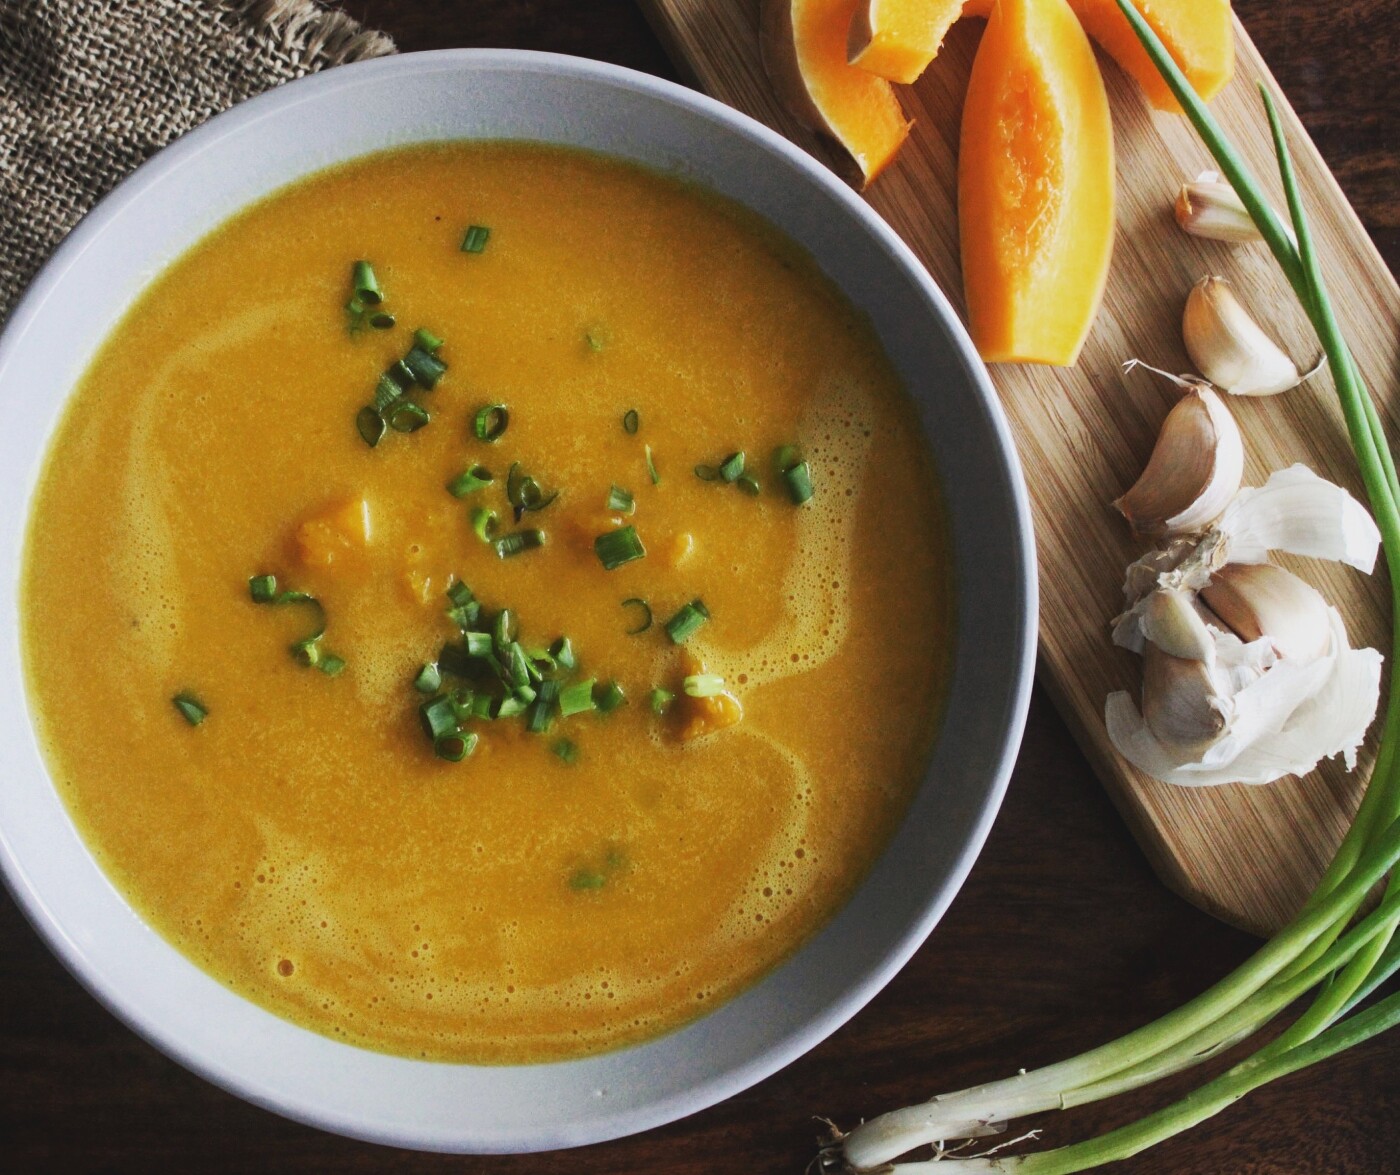 This is a squash soup I made for a photographic assignment in a food styling course.